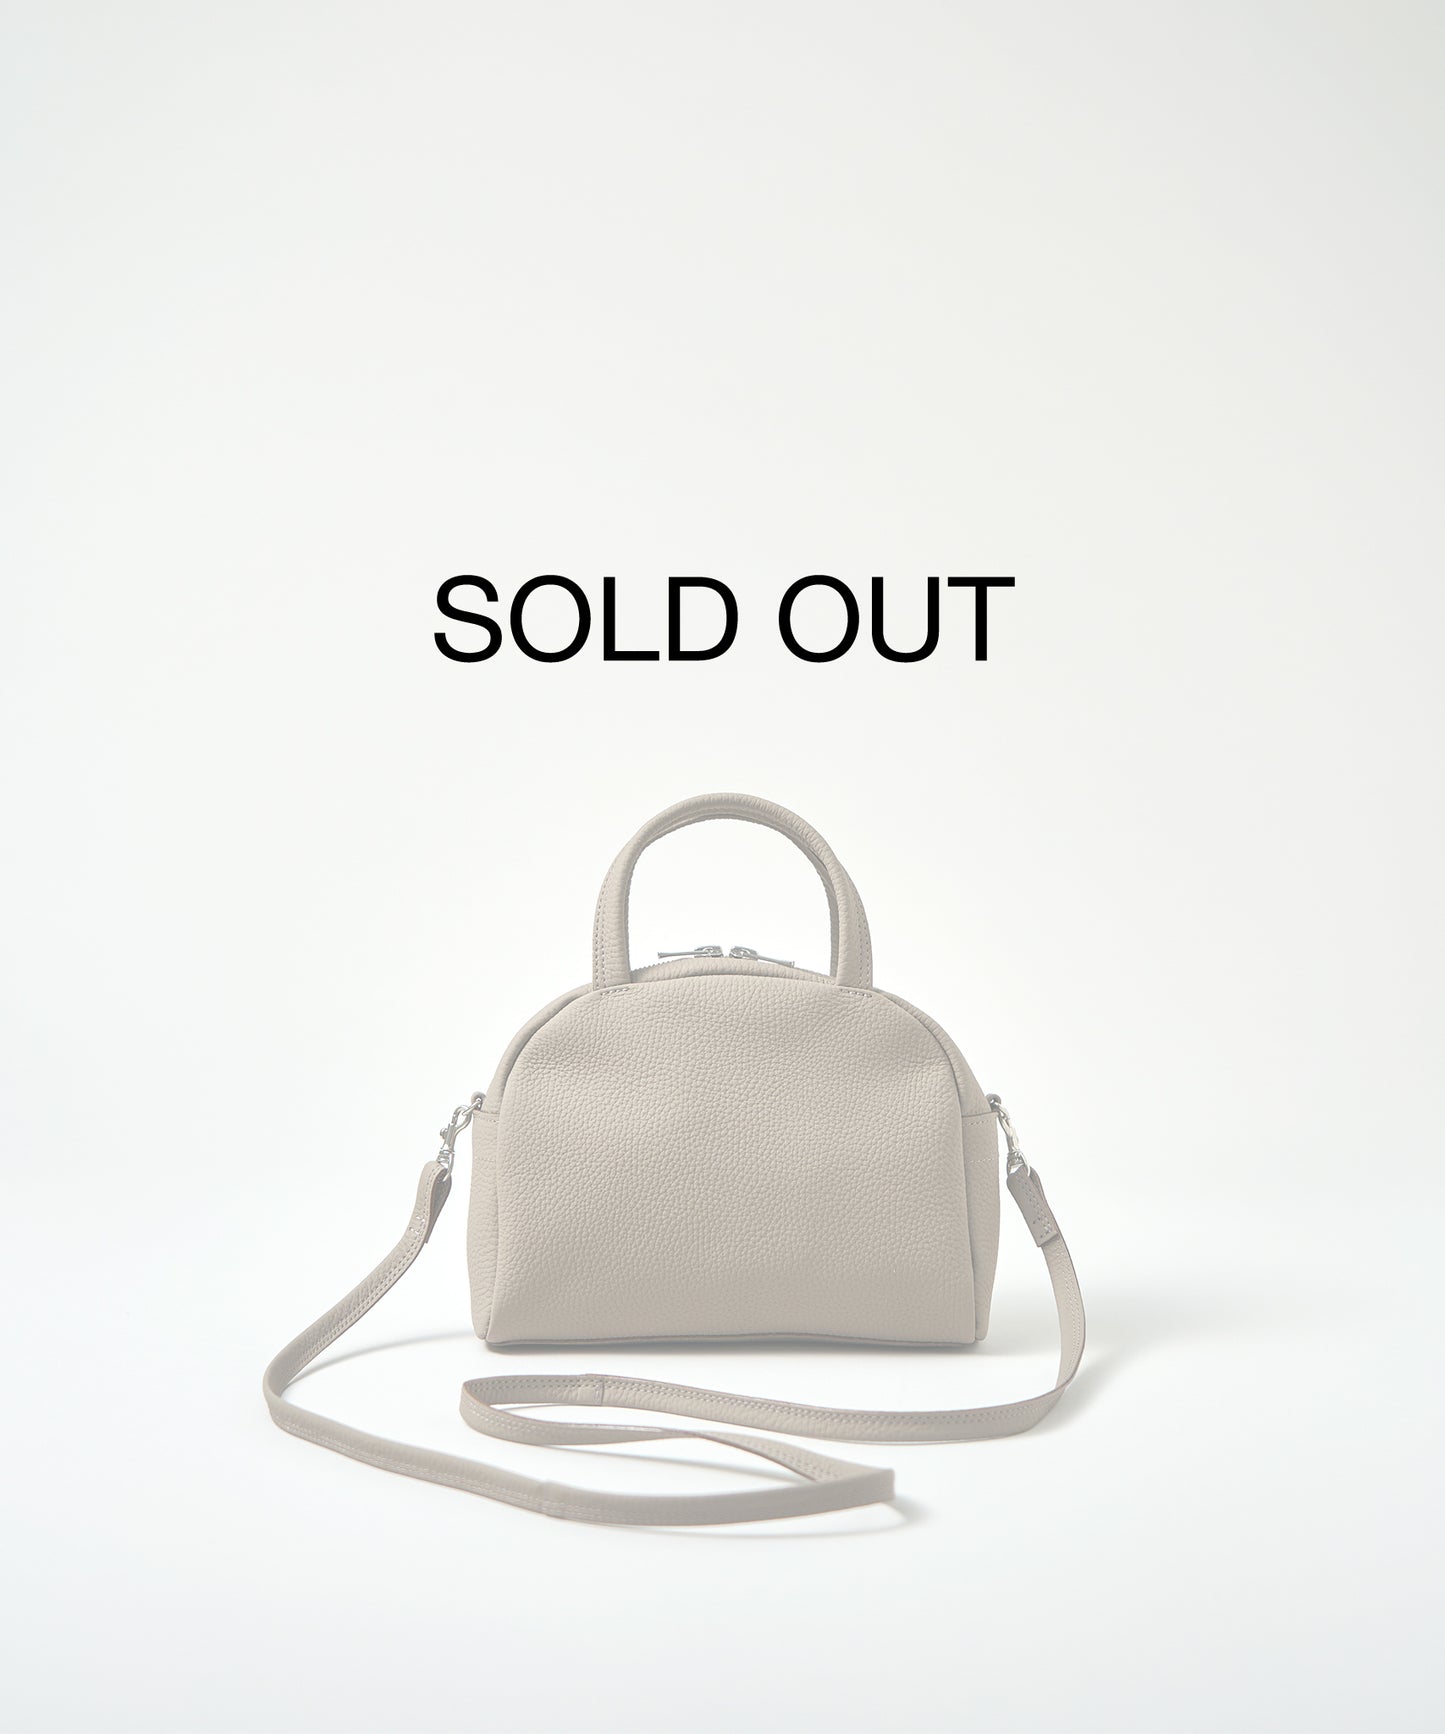 sold out / マイクロボストン2way / 牛革・フィリップ